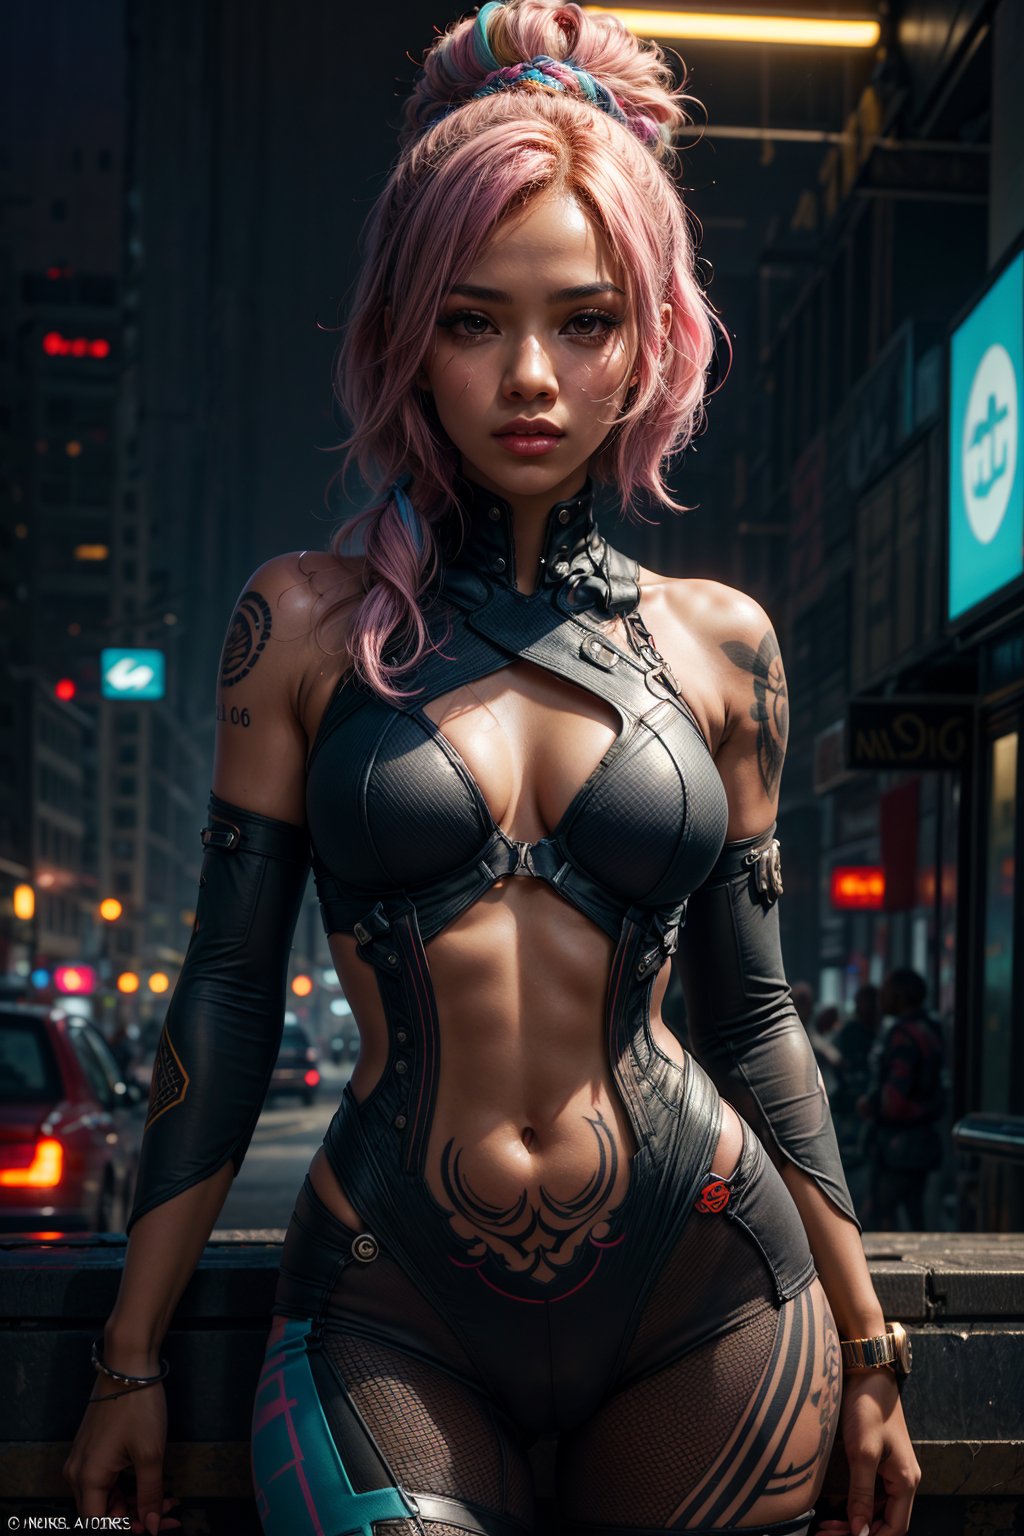 (1girl:1.2, body covered in words, words on body:1.1, (african woman), tattoos of (words) on body:1.2), (masterpiece:1.4, best quality), medium breasts, unity 8k wallpaper, ultra detailed, (pastel colors:1.3), bodysuit, cyberpunk, alluring pose, upper body, beautiful and aesthetic, see-through (clothes), detailed, solo <lora:epi_noiseoffset2:1.3> <lora:Bodysuit v13:0.4> <lora:more_details:1> <lora:Elixir:0.7>